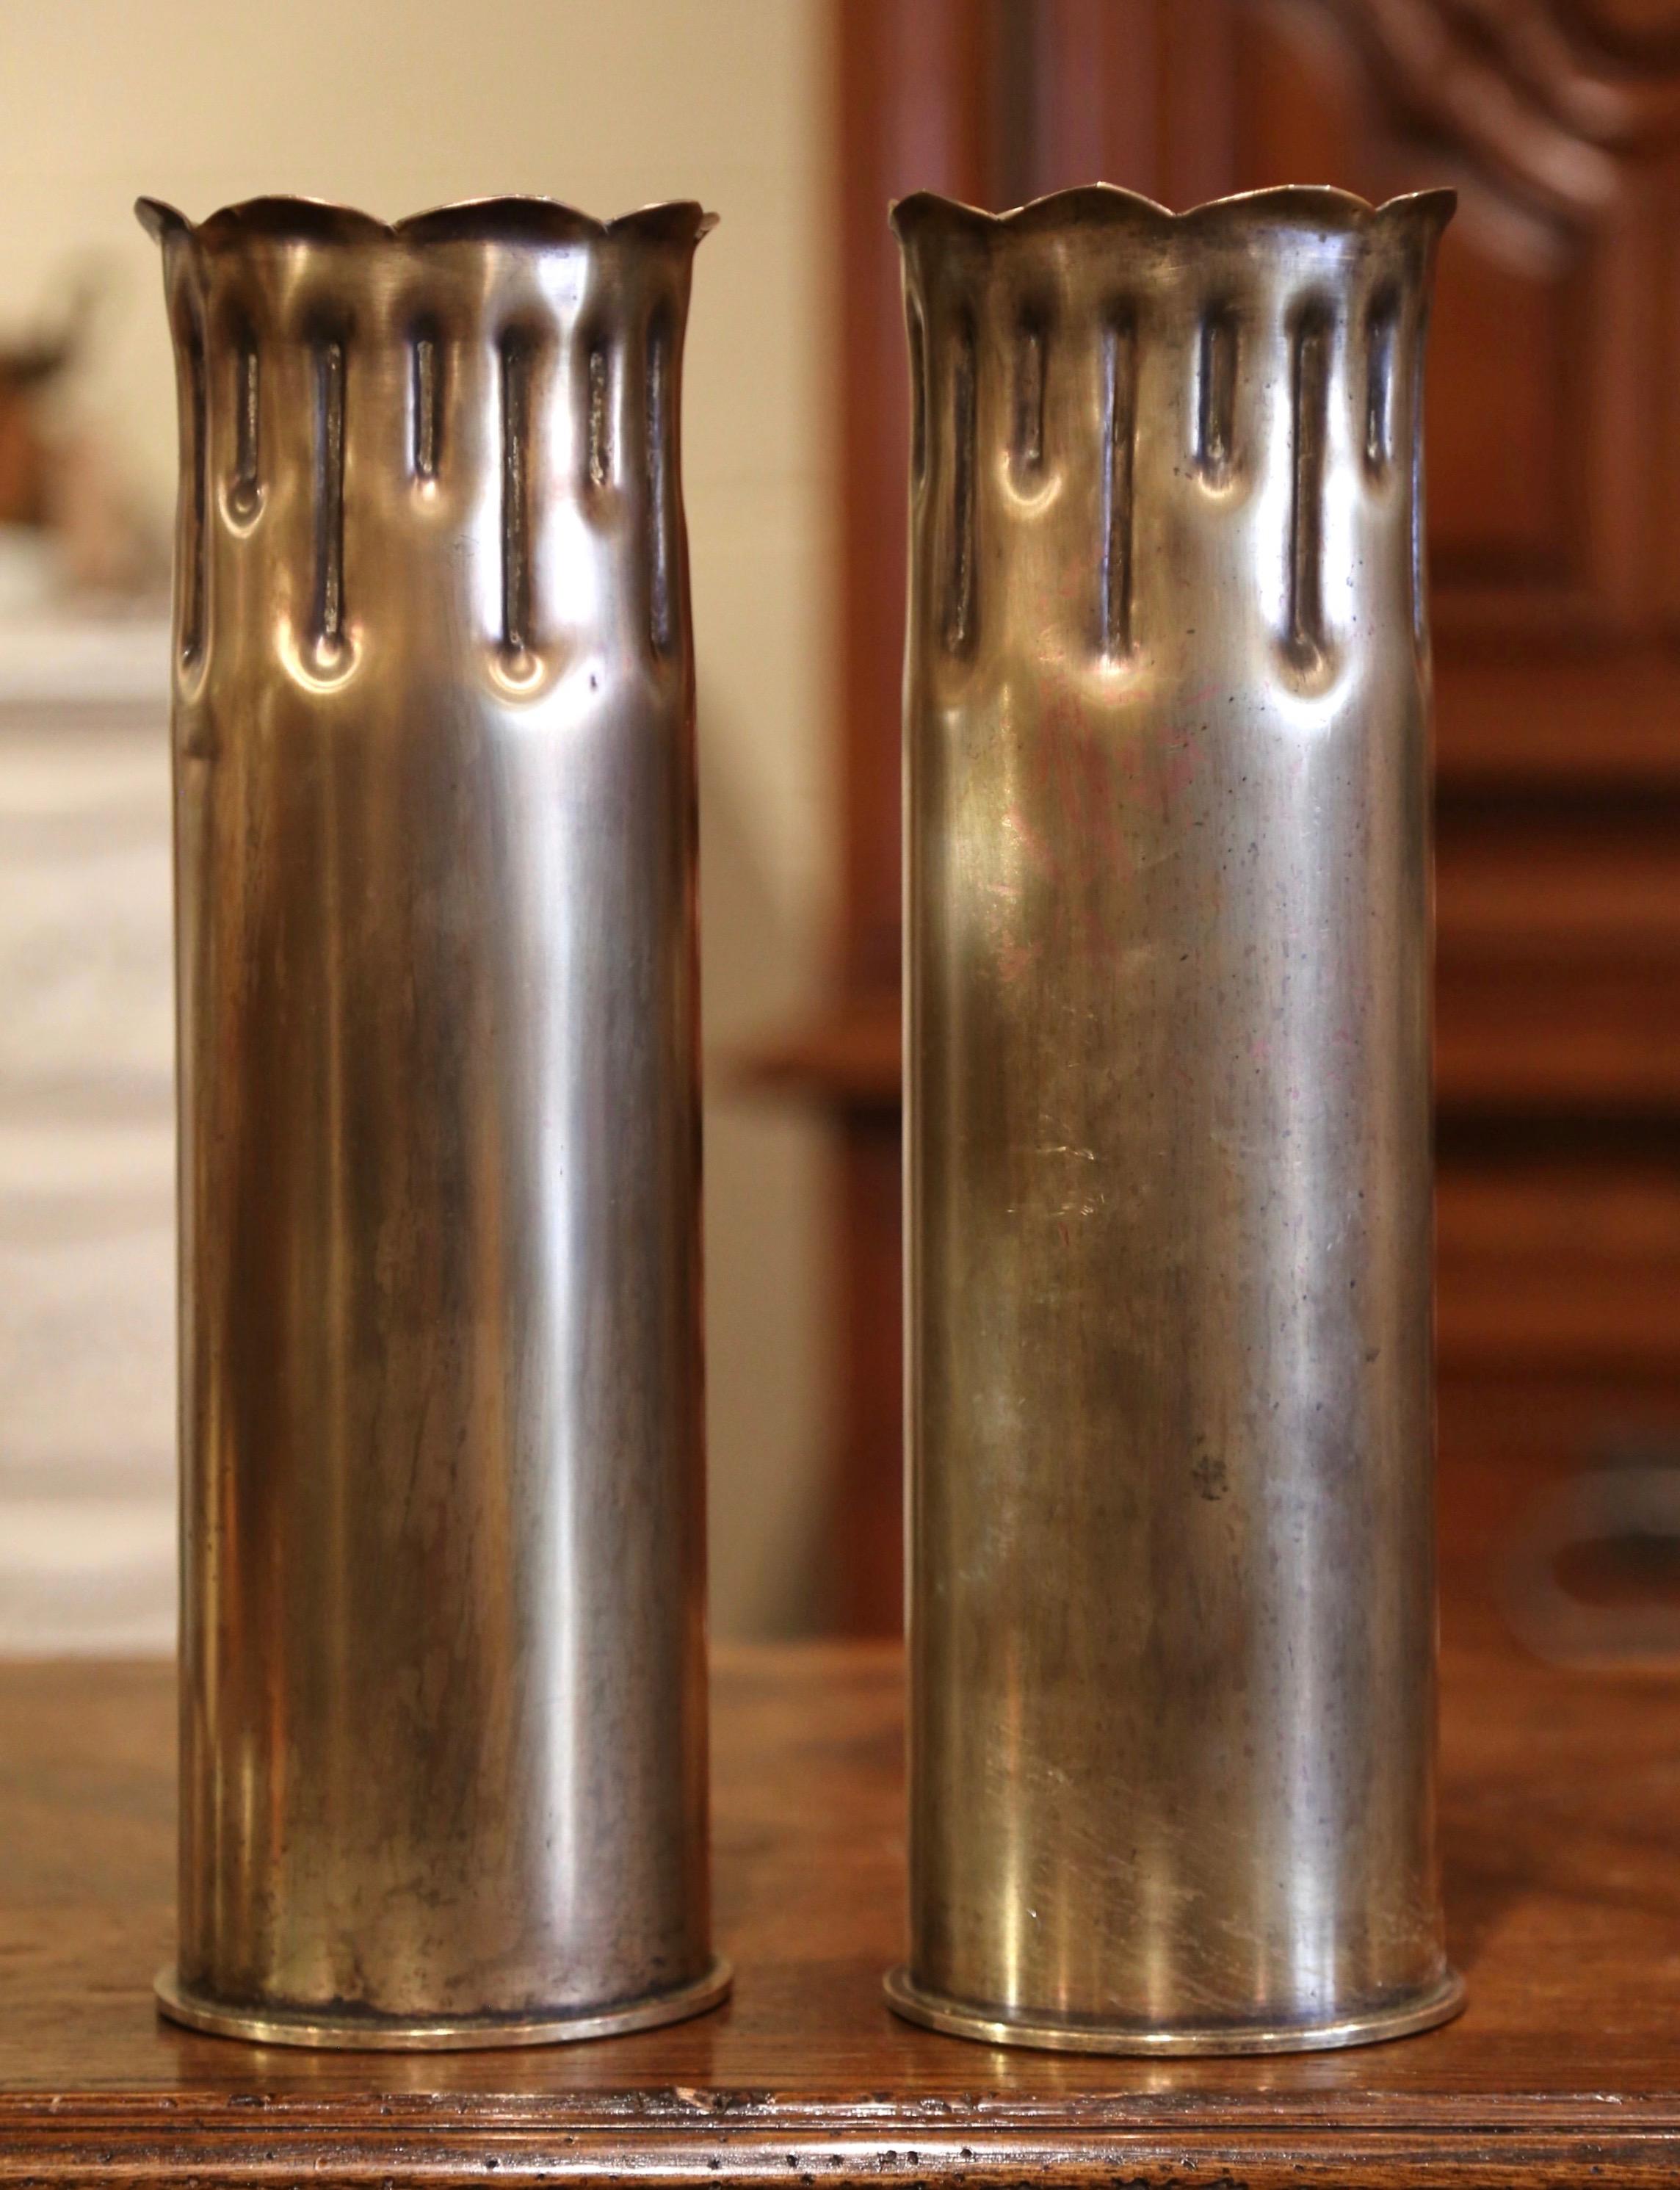 trench art shell casing